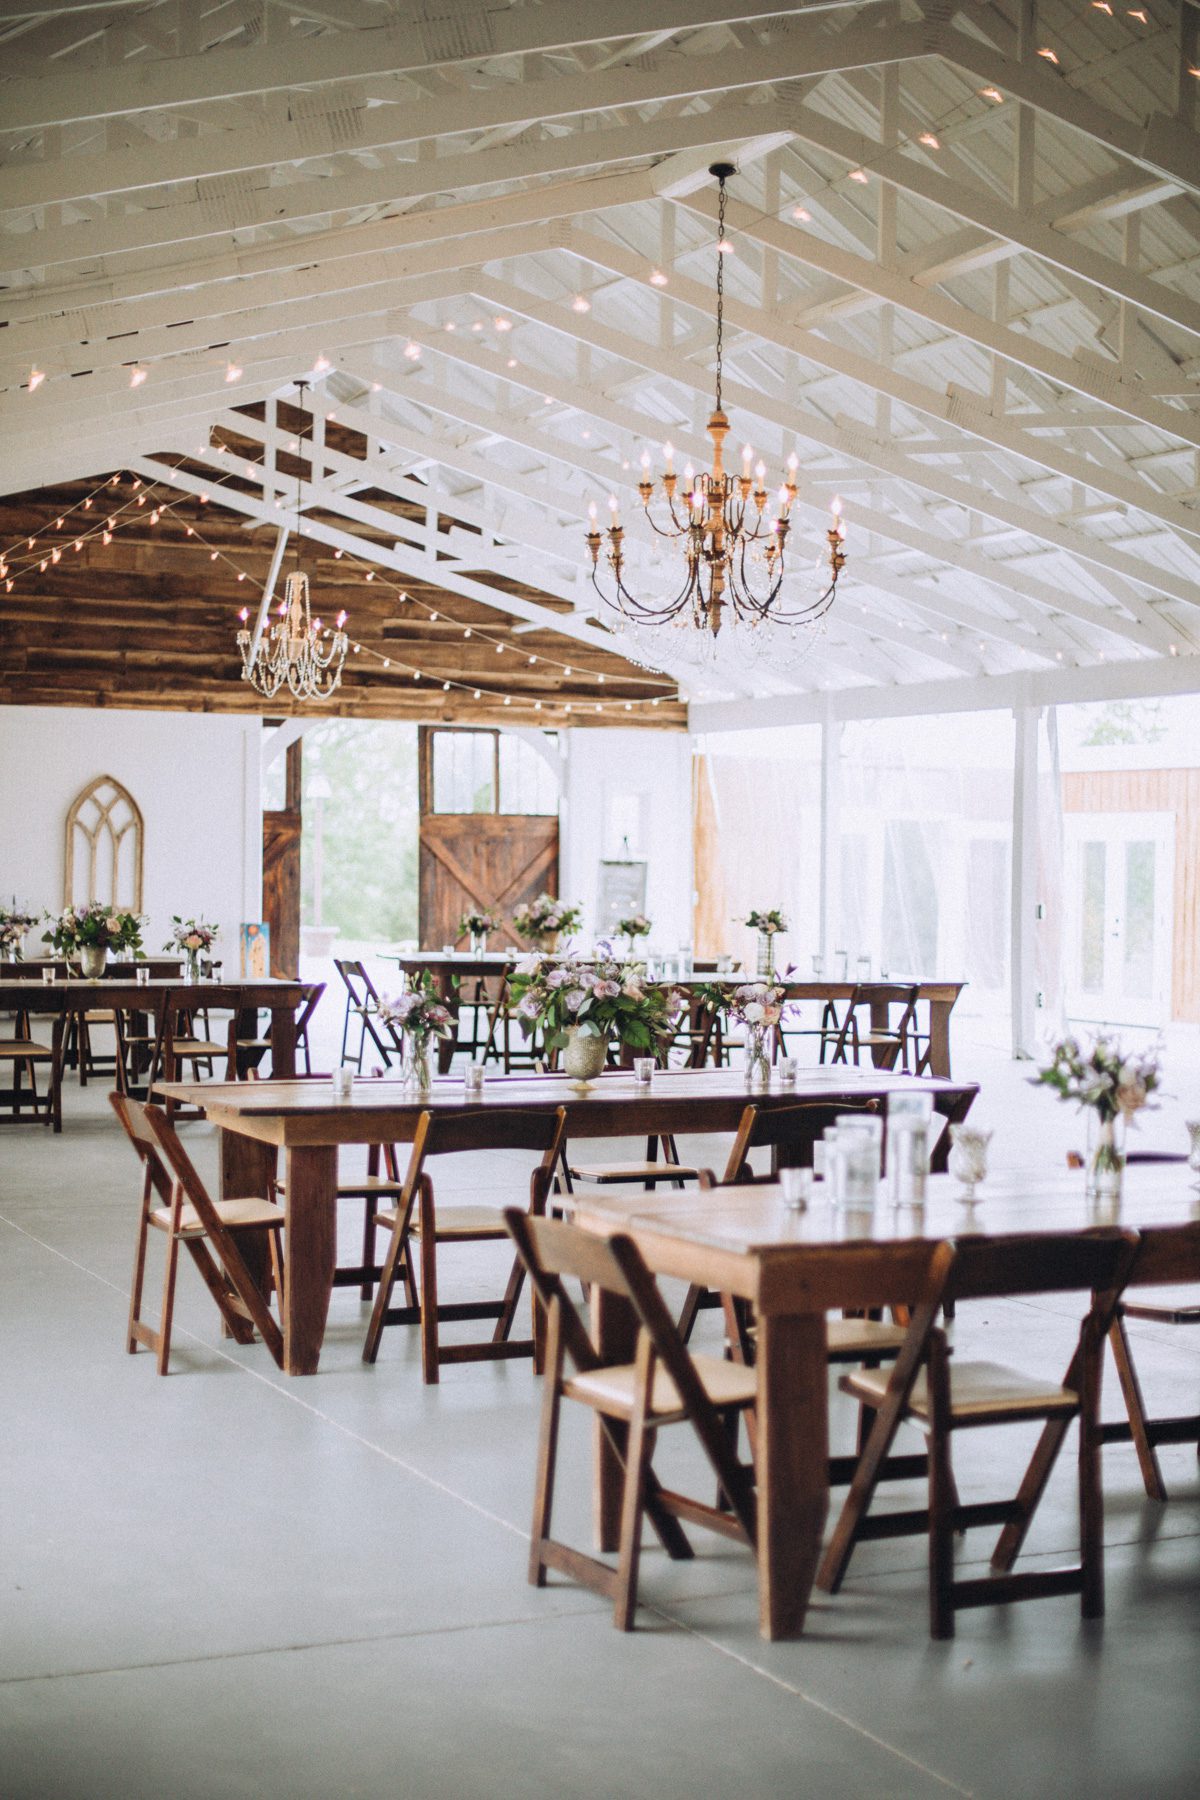 Inside new 2020 updated pavilion before wedding ceremony at Front Porch Farms Charlotte TN